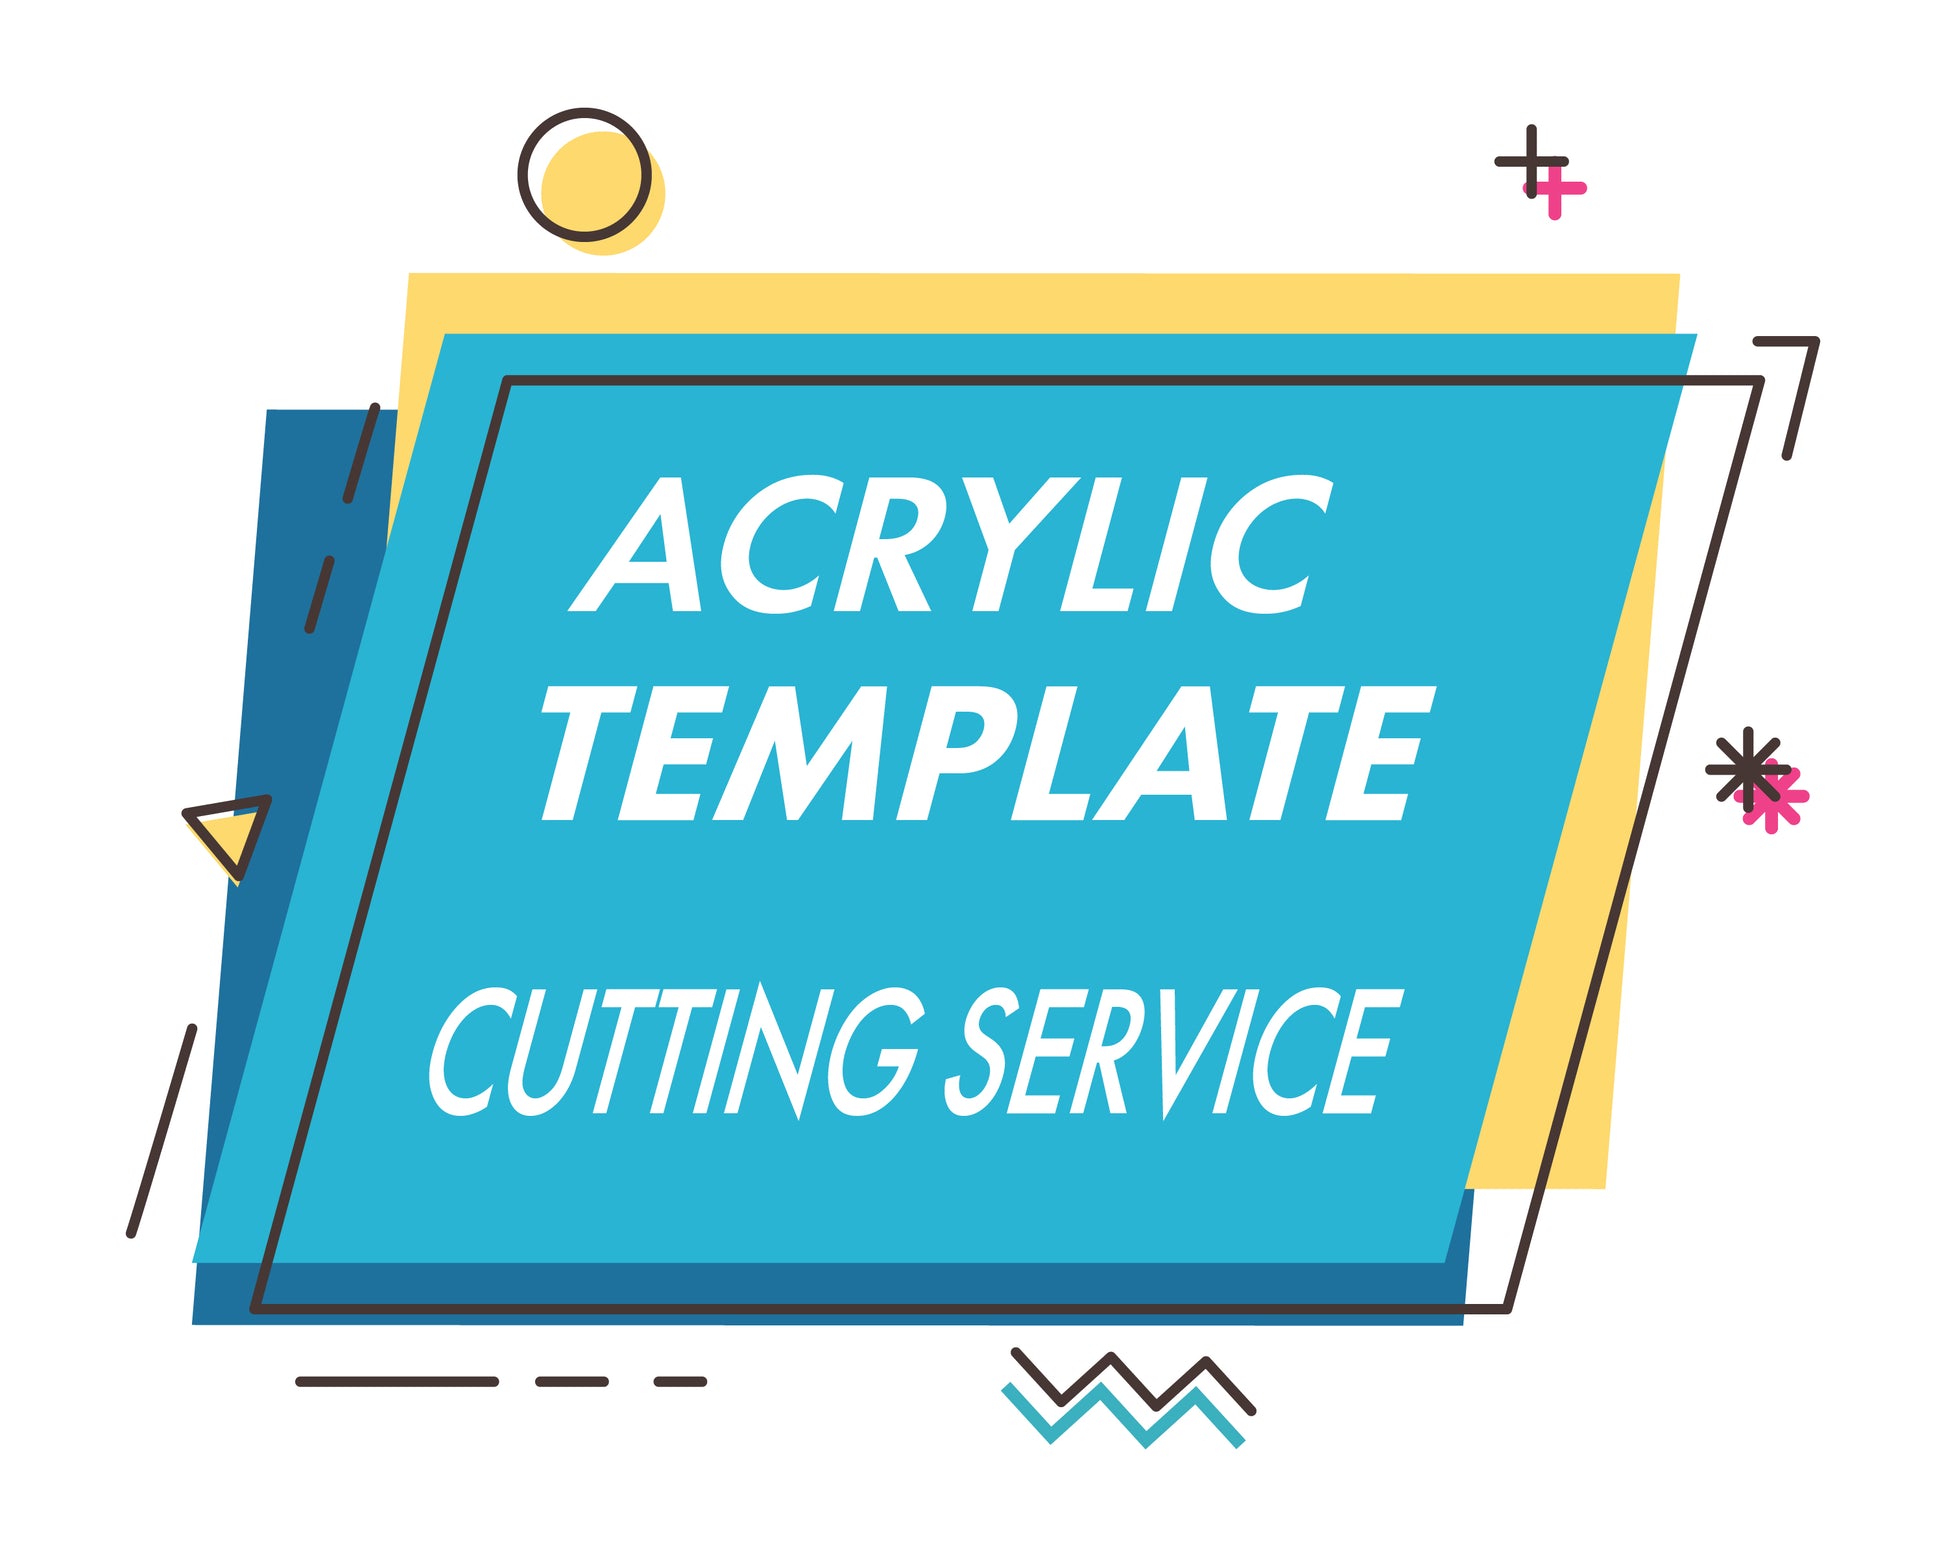 Custom Acrylic Template Pattern Cutting Service - Design Concepts Chi